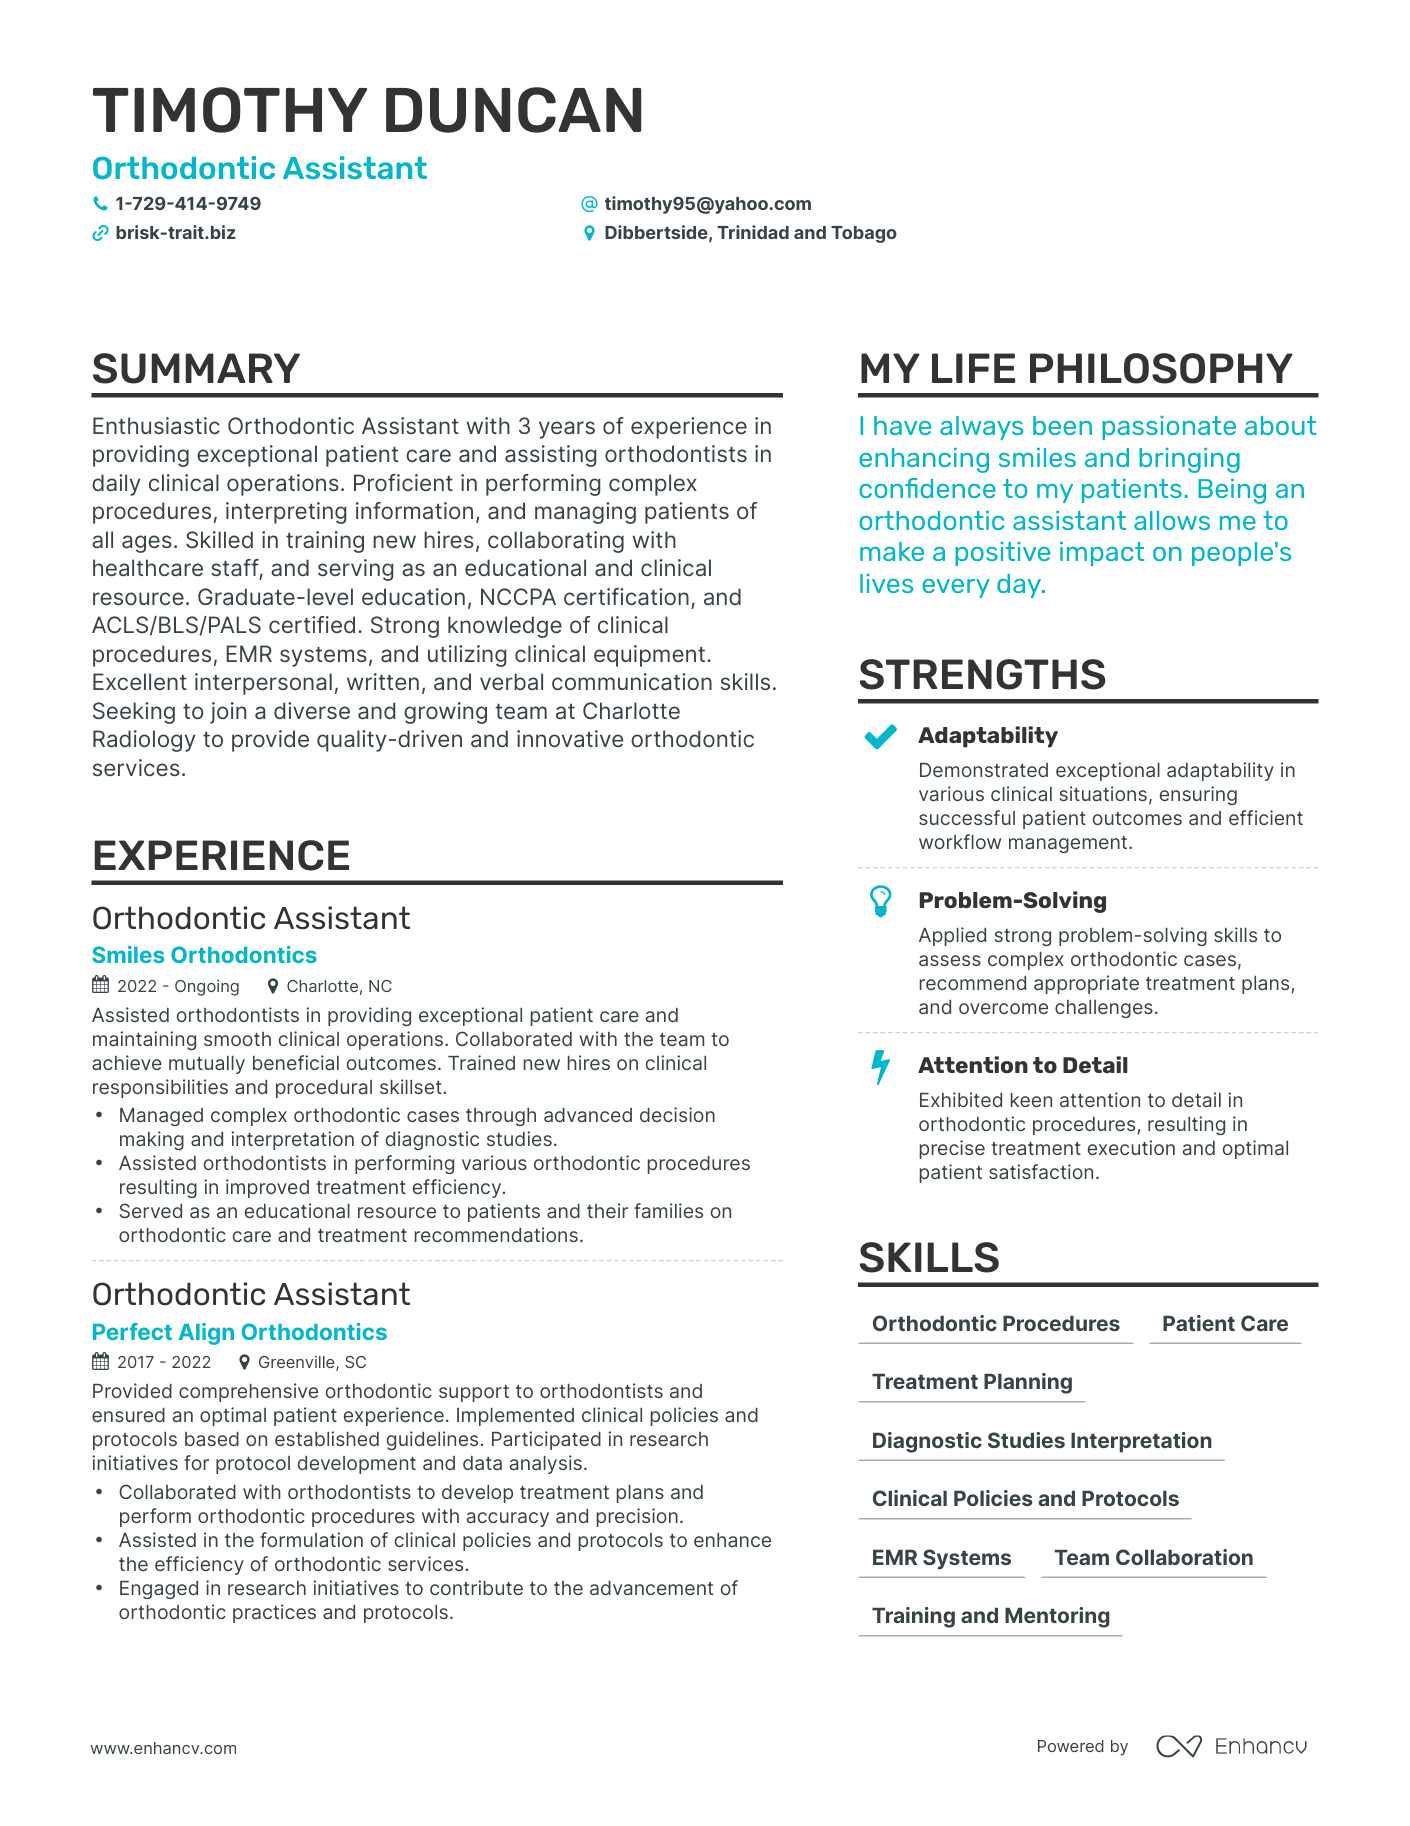 Orthodontic Assistant resume example